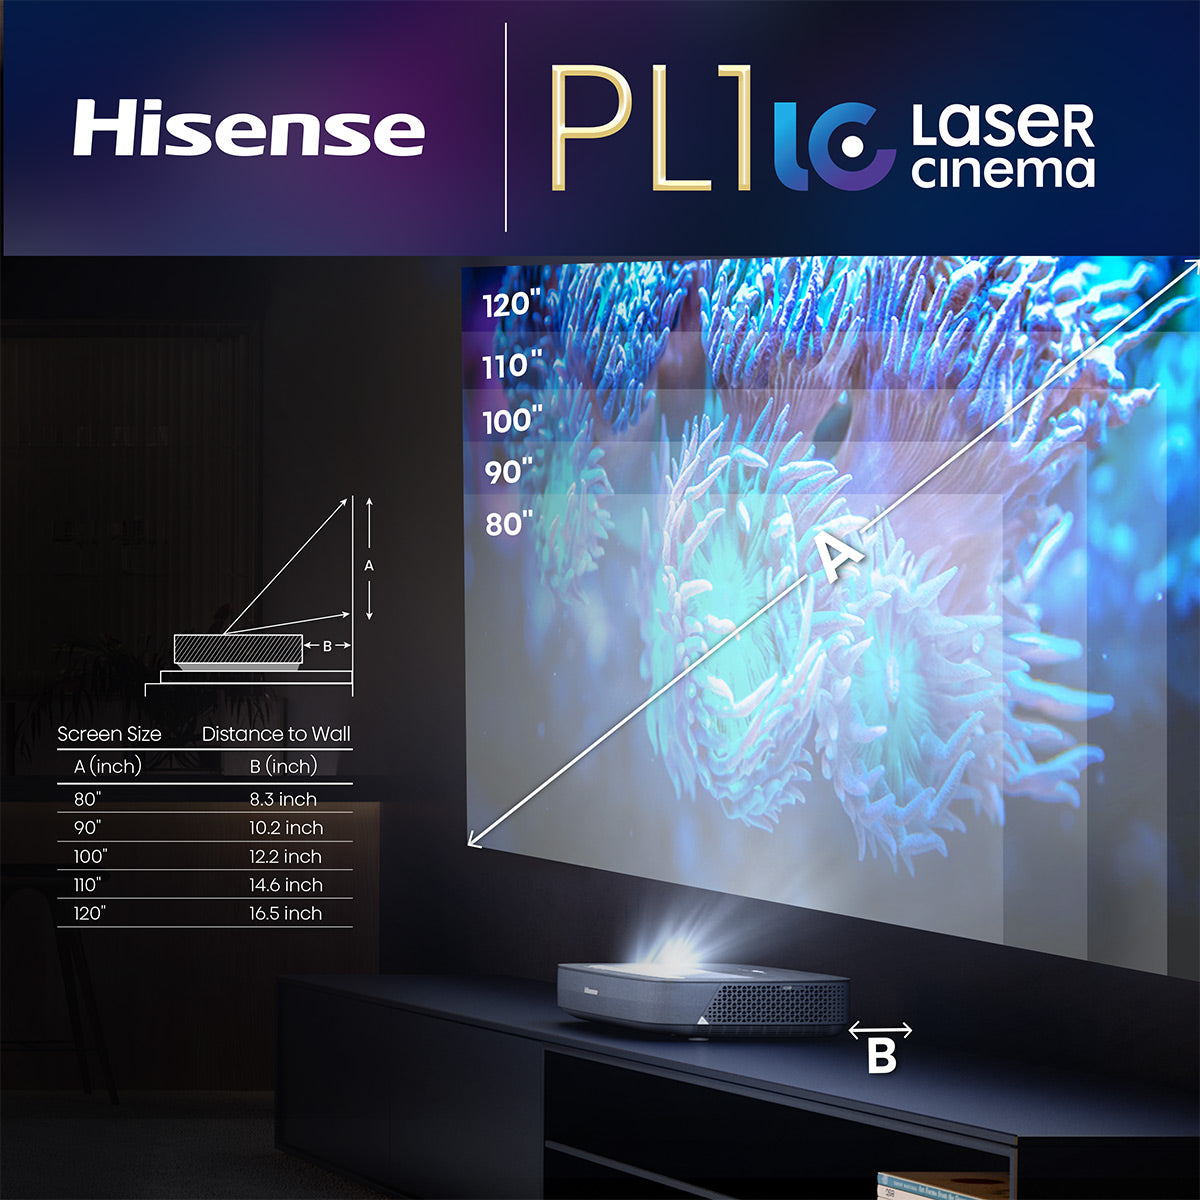 Hisense's C1 Laser Projector Offers A Compact Solution For A Huge